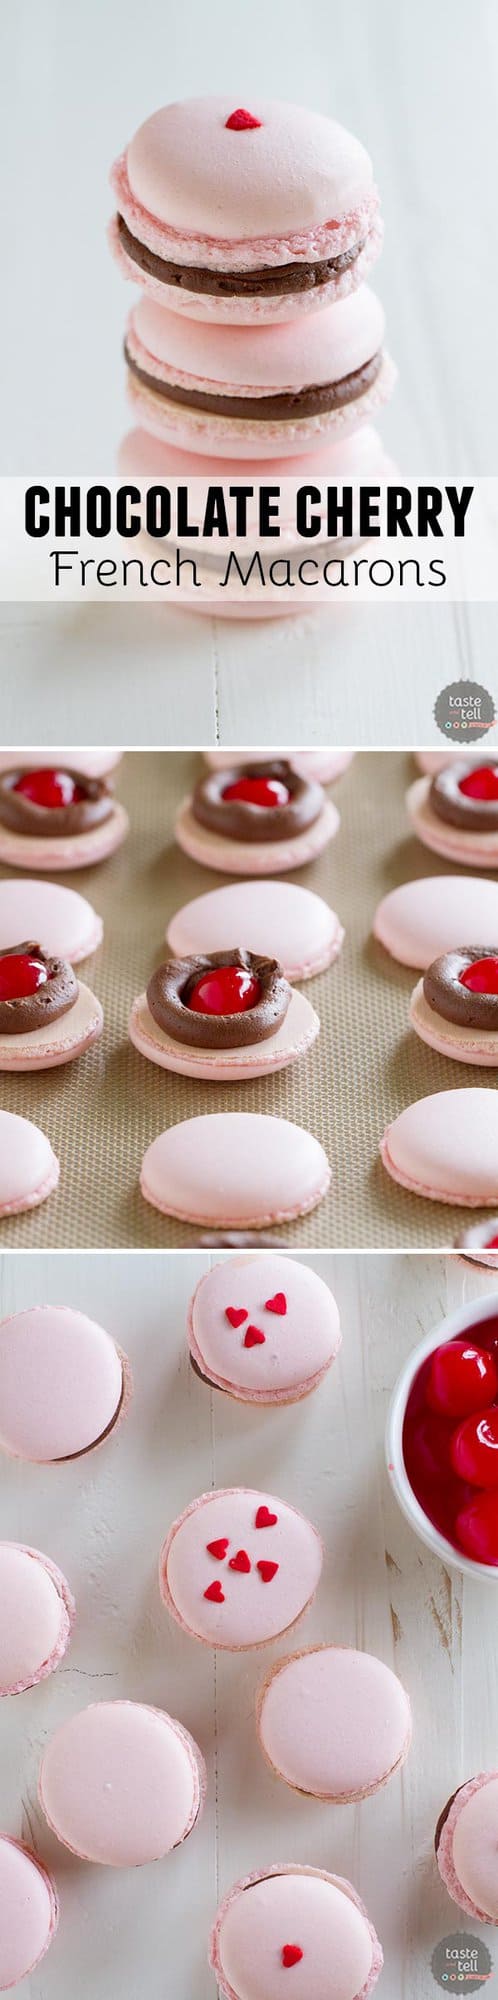 French macarons, made using the Italian Meringue Method, are filled with a chocolate buttercream and a maraschino cherry.  These chocolate cherry French Macarons are the perfect way to jazz up a chocolate covered cherry!